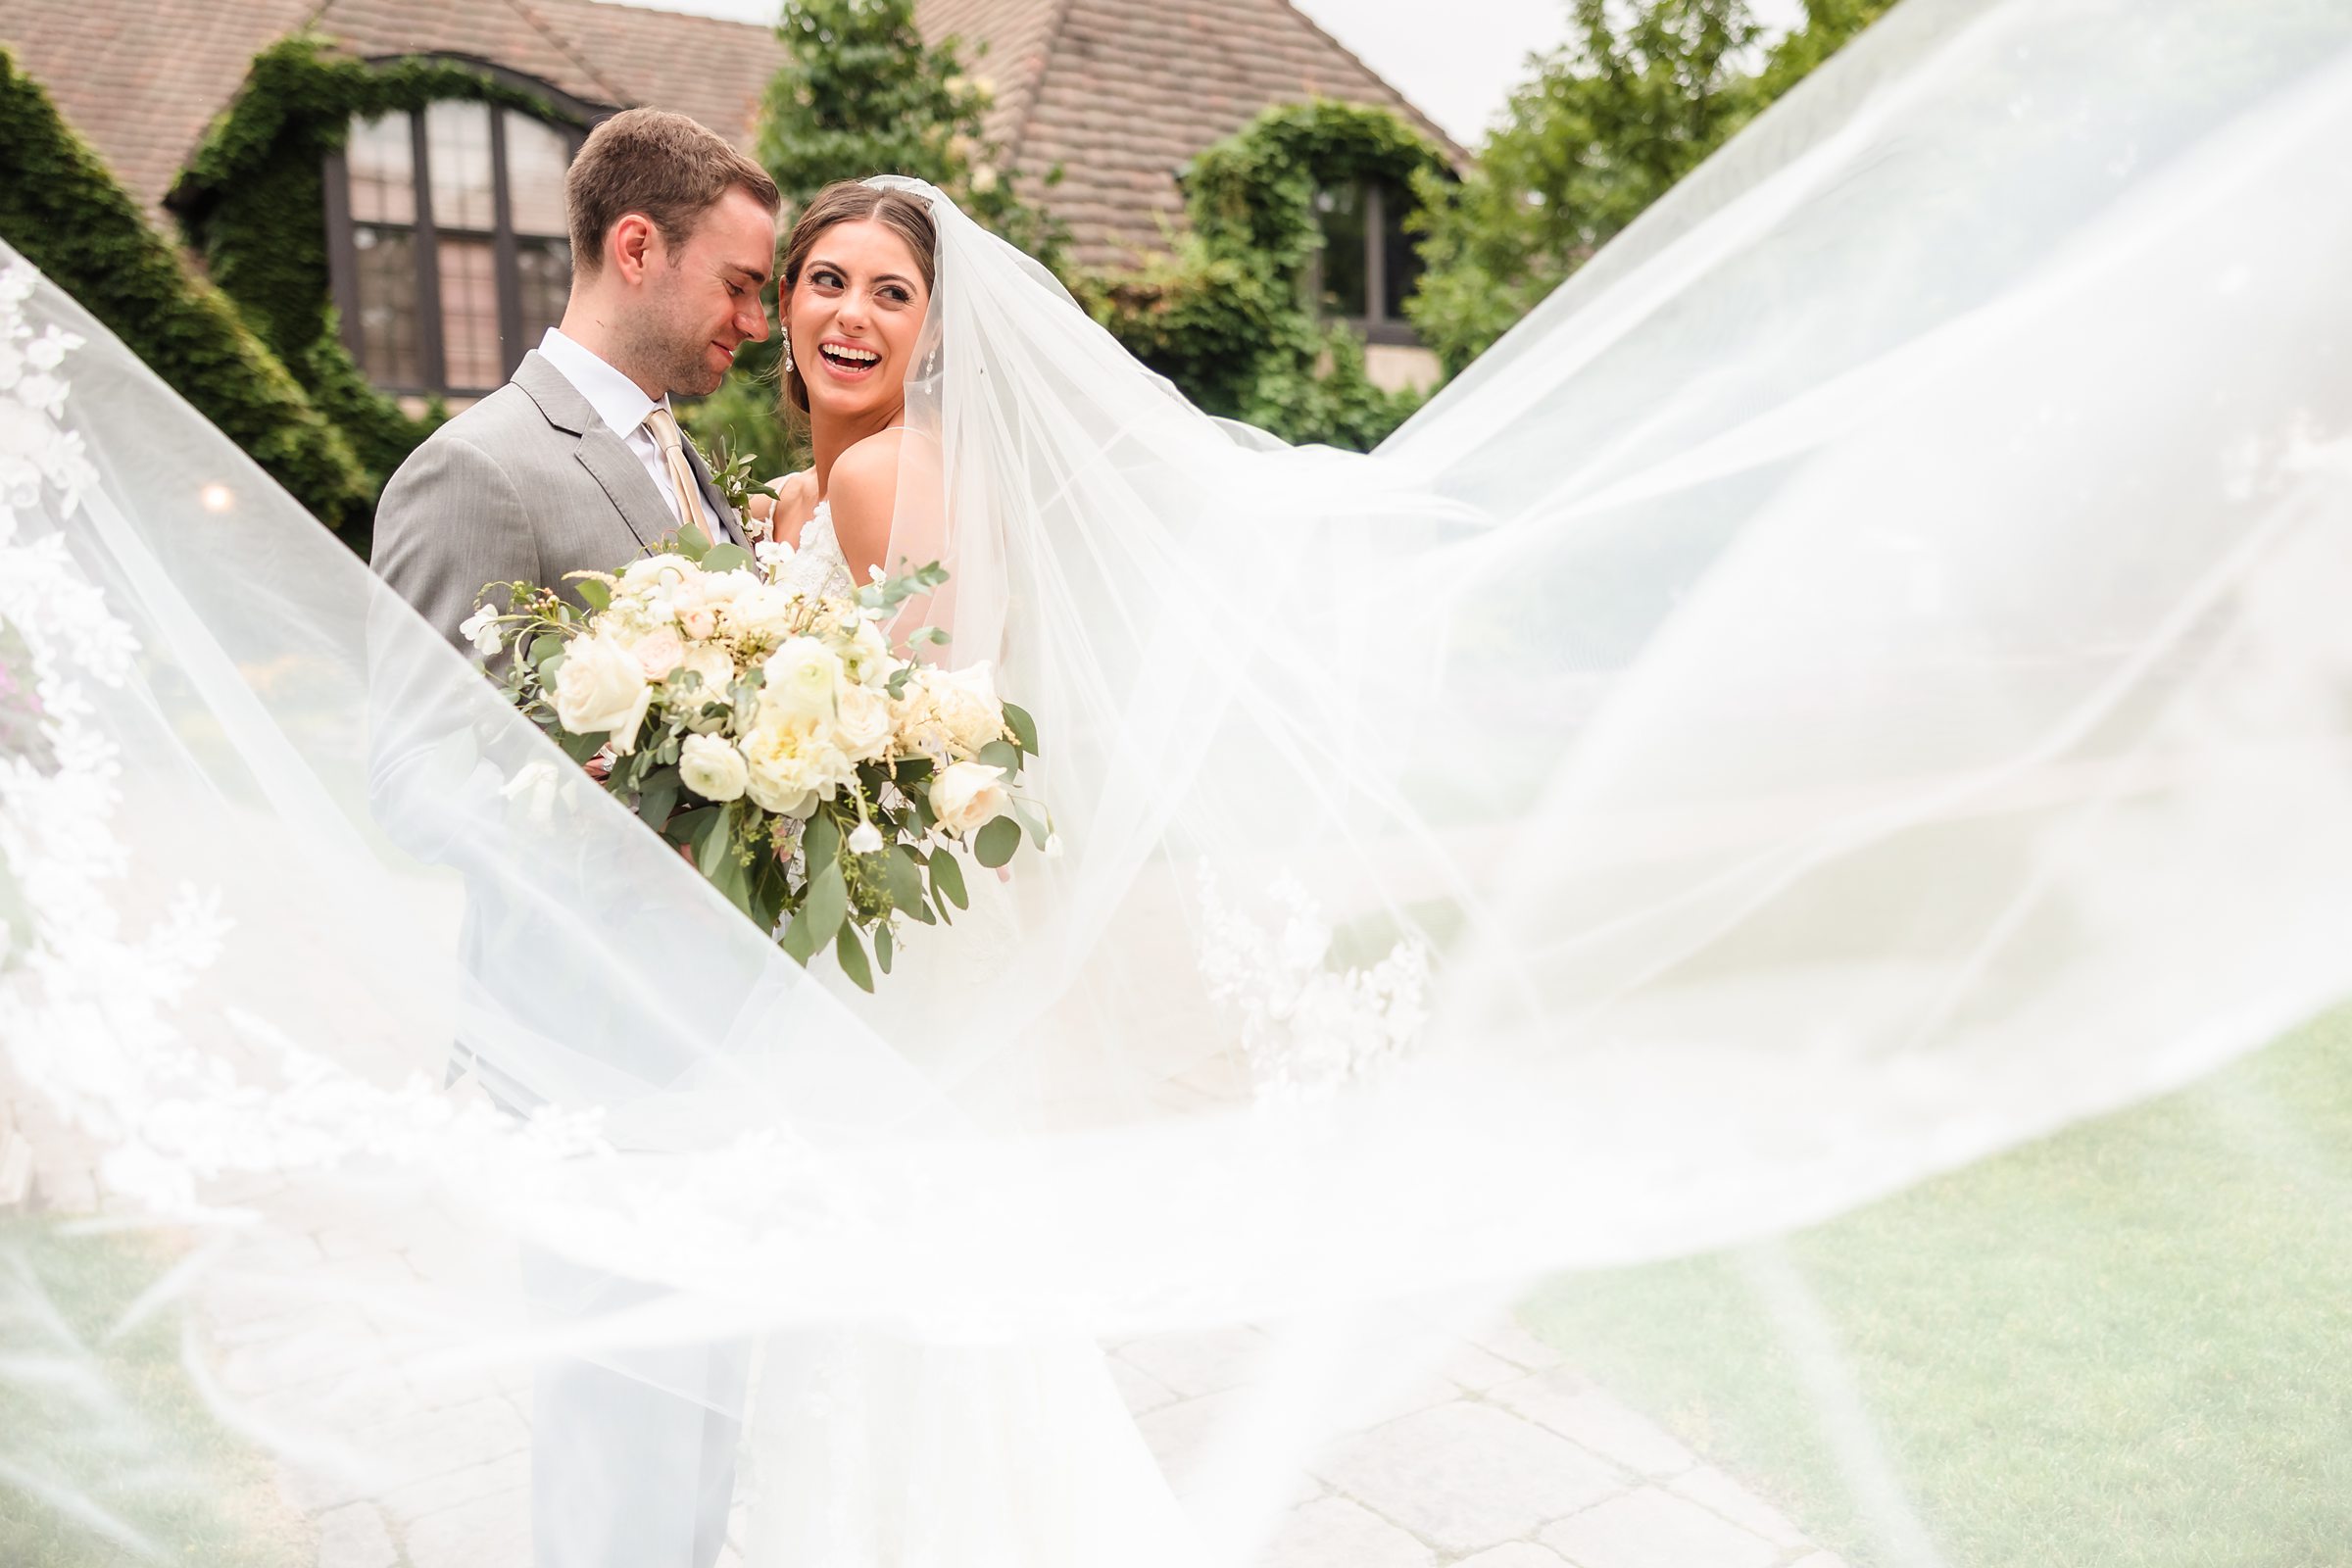 Bride and Groom celebrate their wedding at the Monte Bello Estate in Lemont, Illinois.